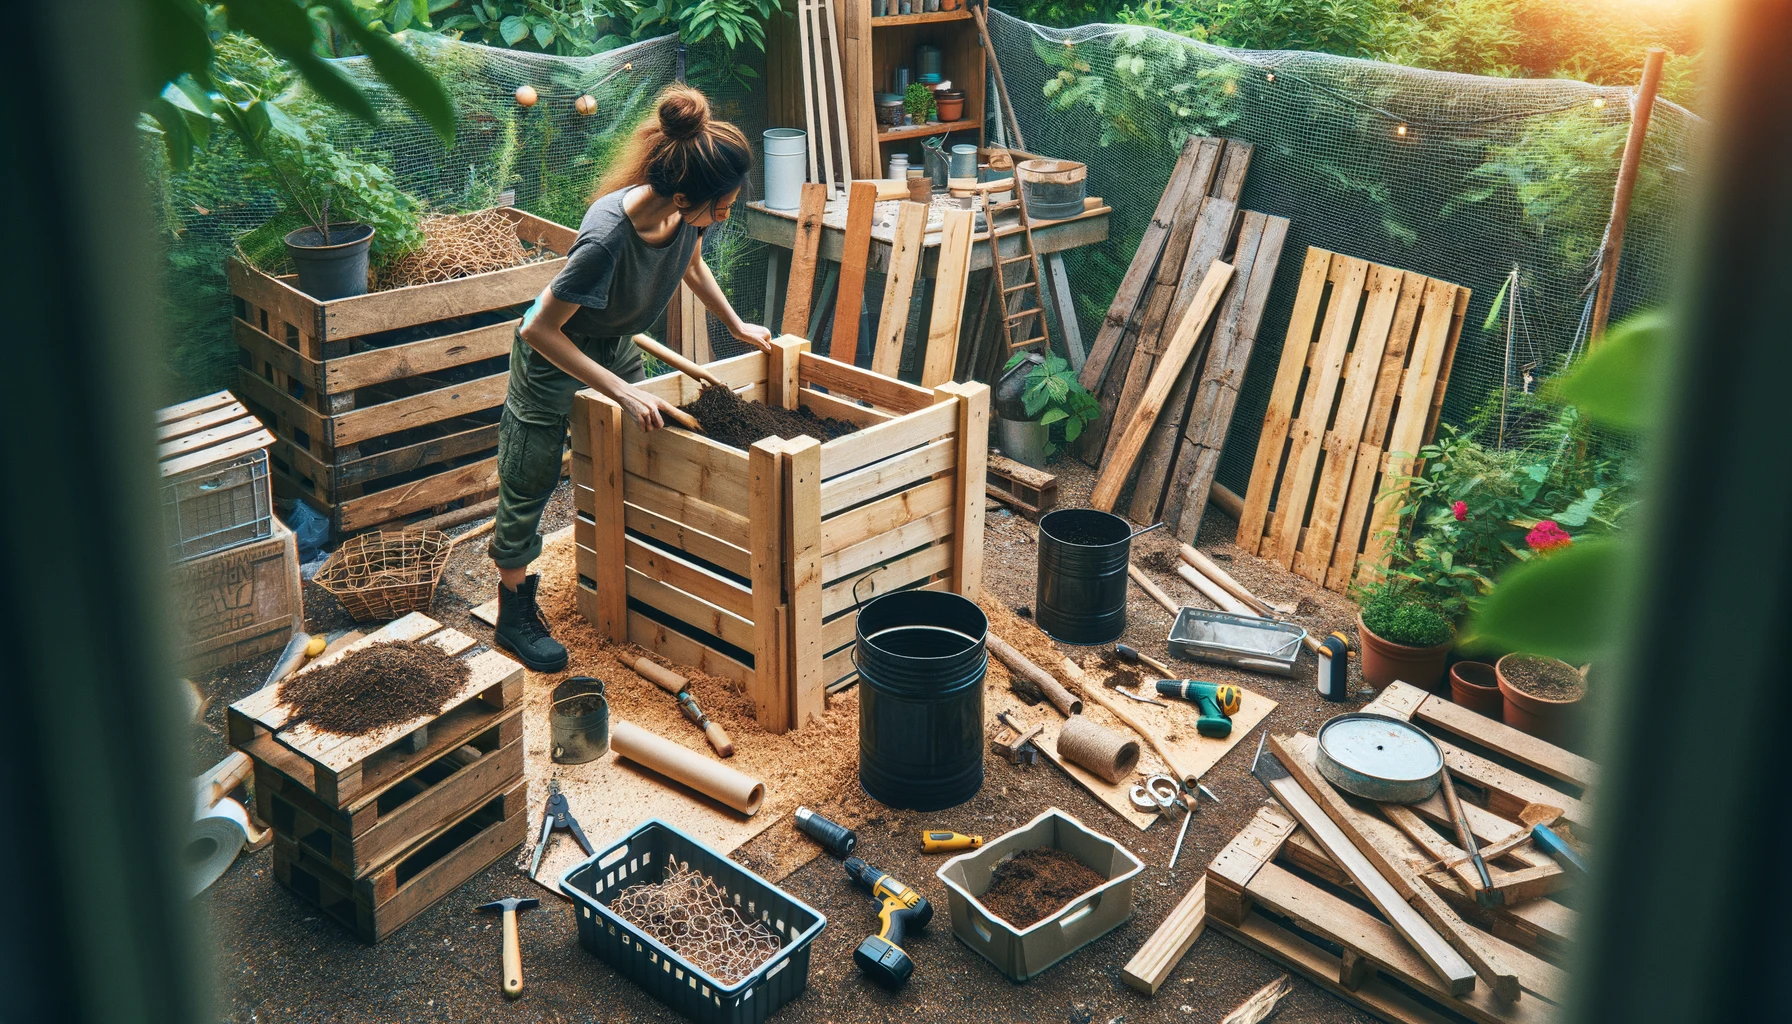 A woman constructing a compost bin in her garden, working with materials like wooden pallets, lumber, chicken wire, and tools